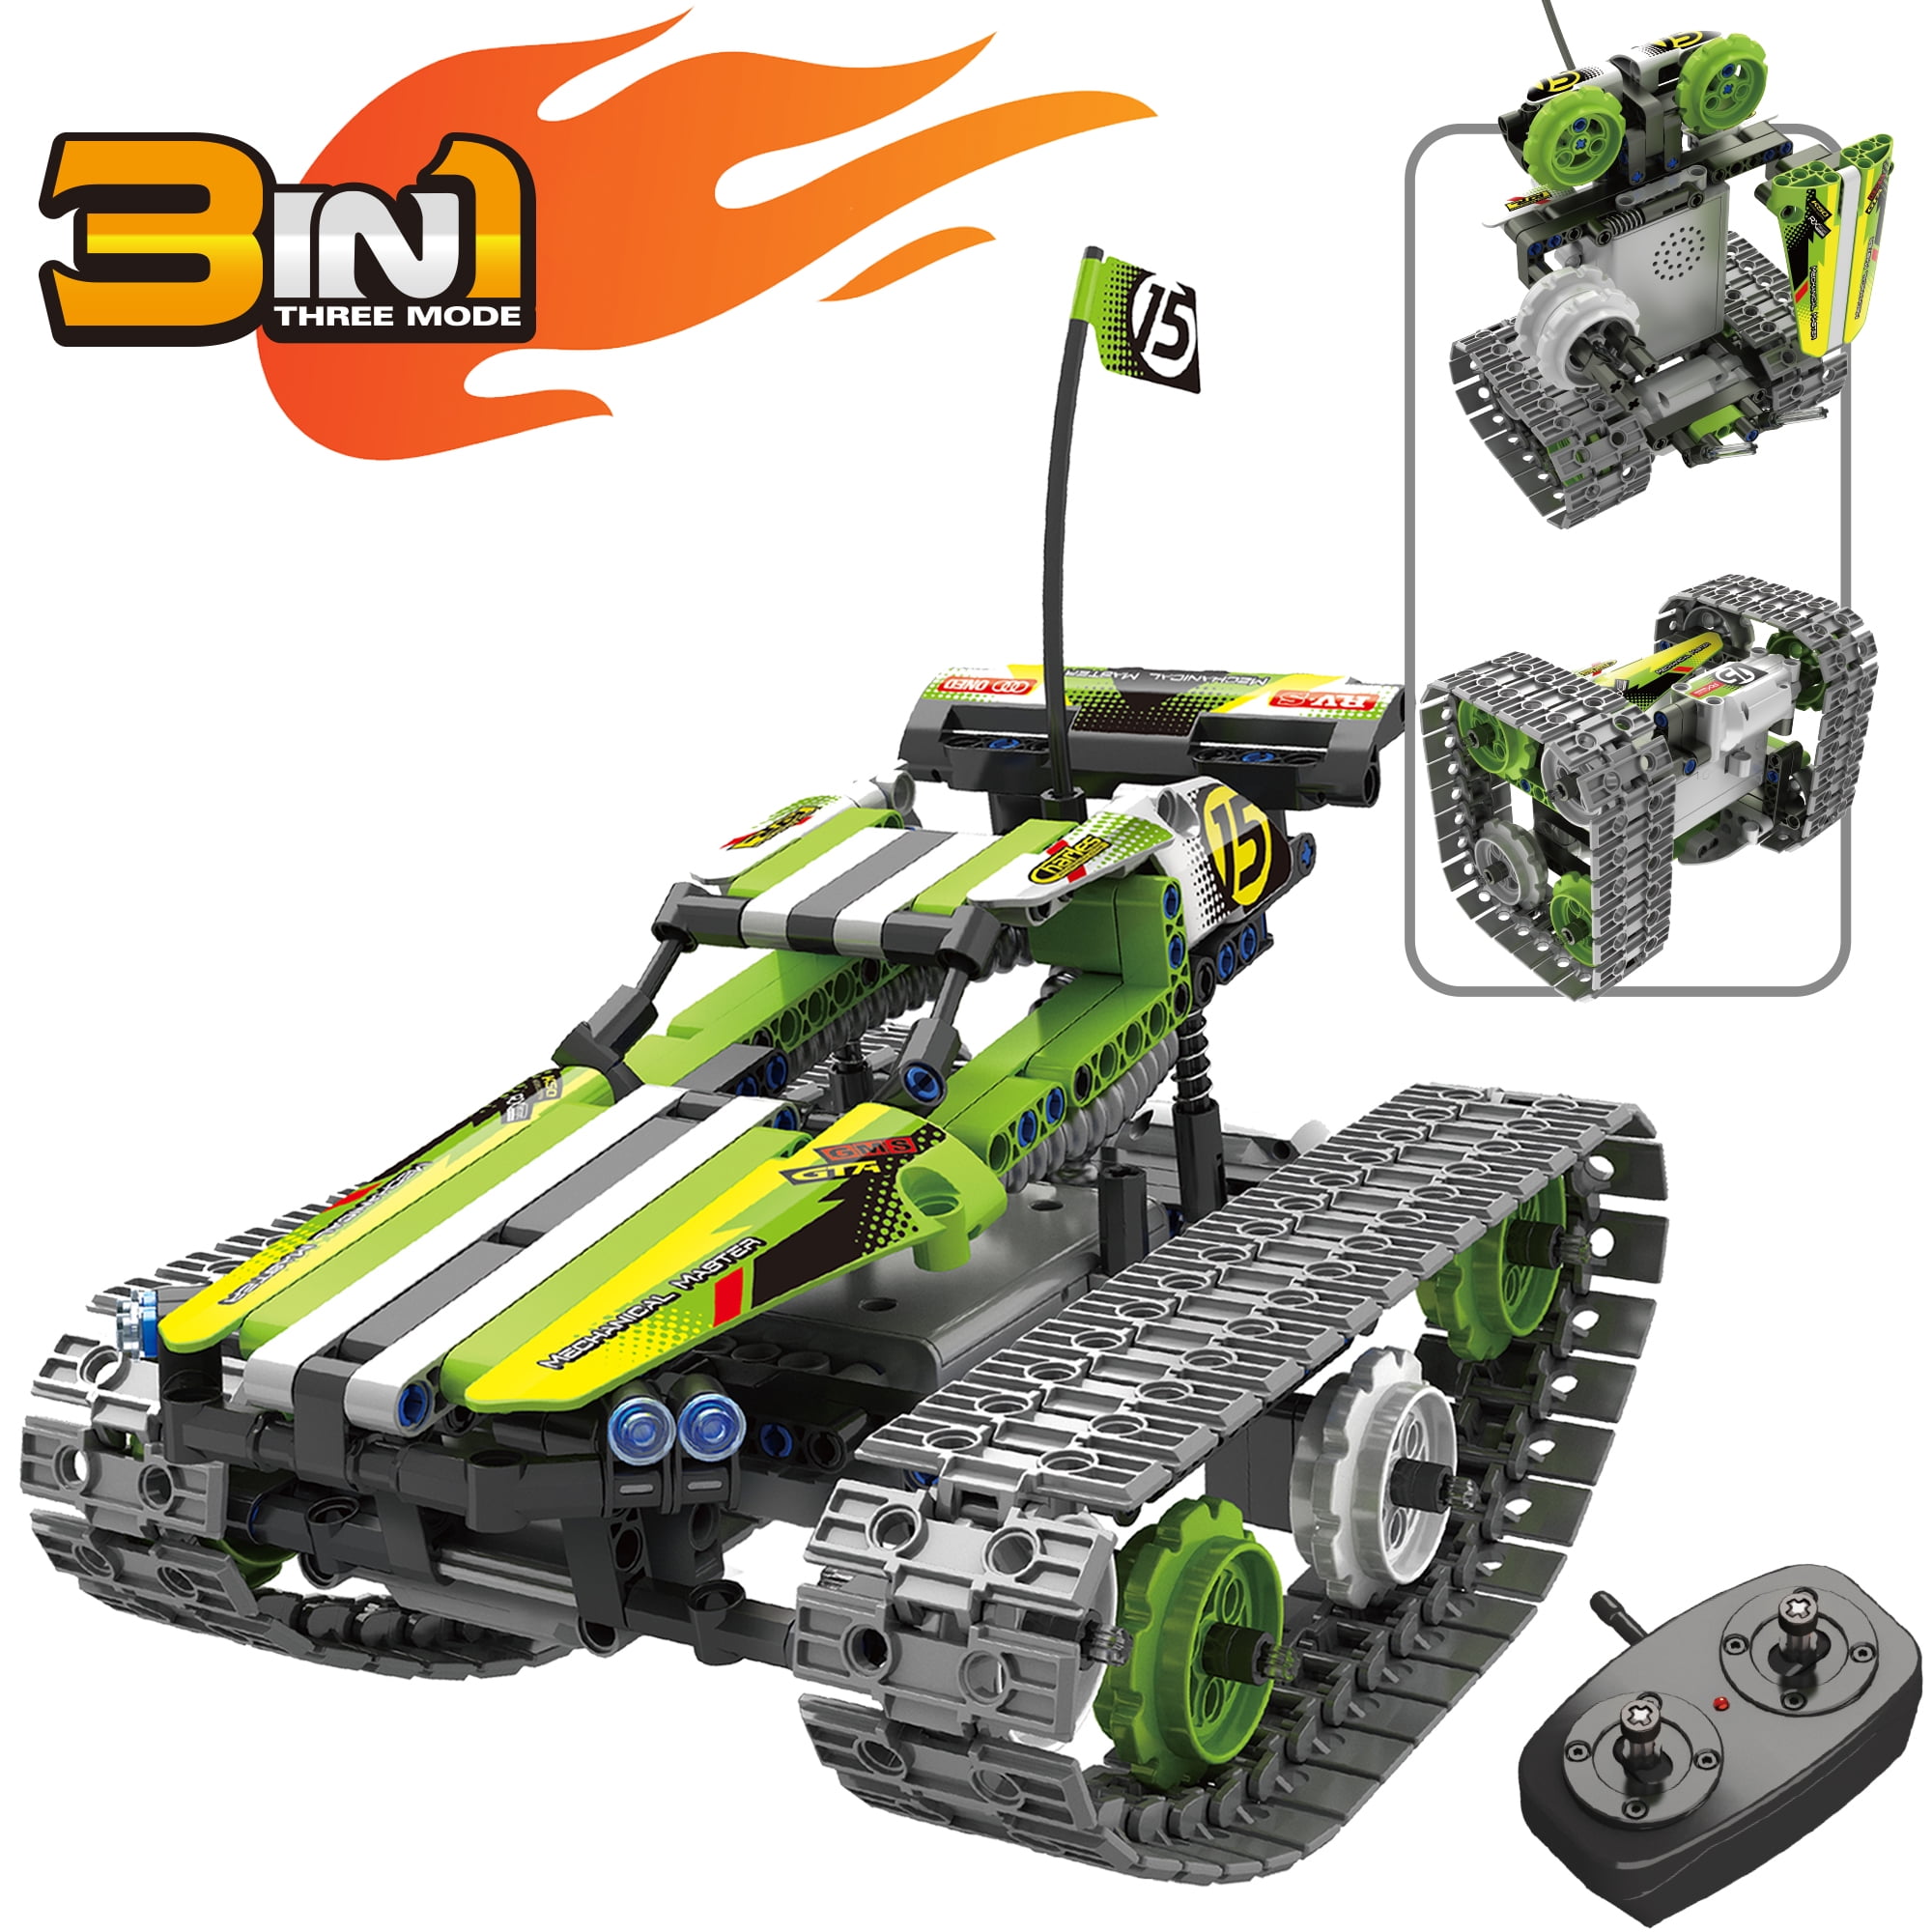 Details about   3-in-1 STEM Remote Control Building Kits-Tracked Car/Robot/Tank 2.4Ghz RC Racer